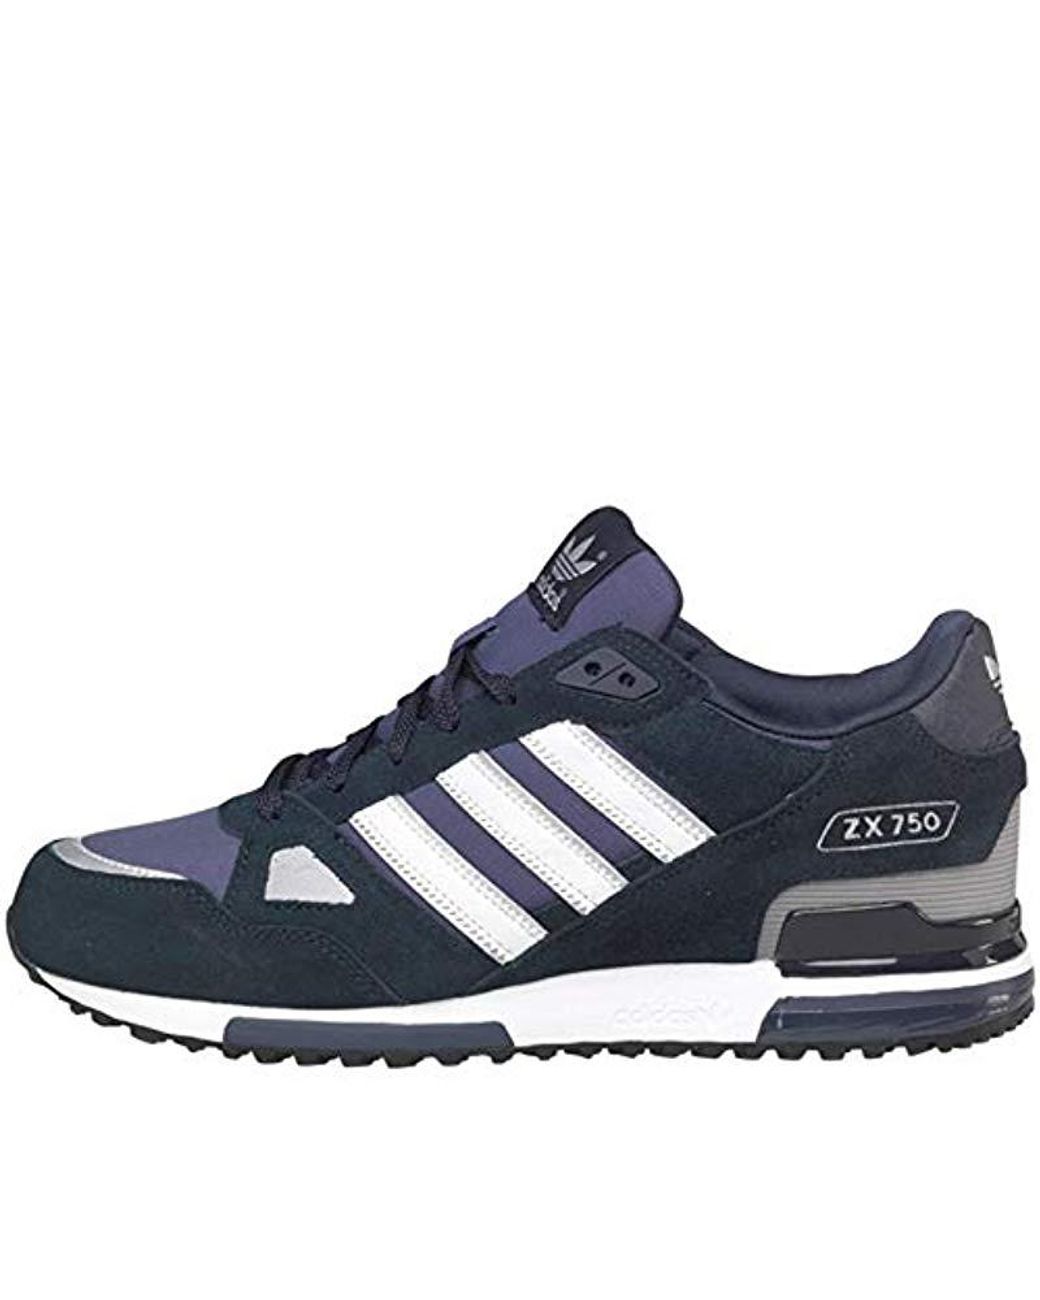 adidas S Originals Zx 750 Blue White Stripes Suede Trainers Shoes Size 11  for Men | Lyst UK